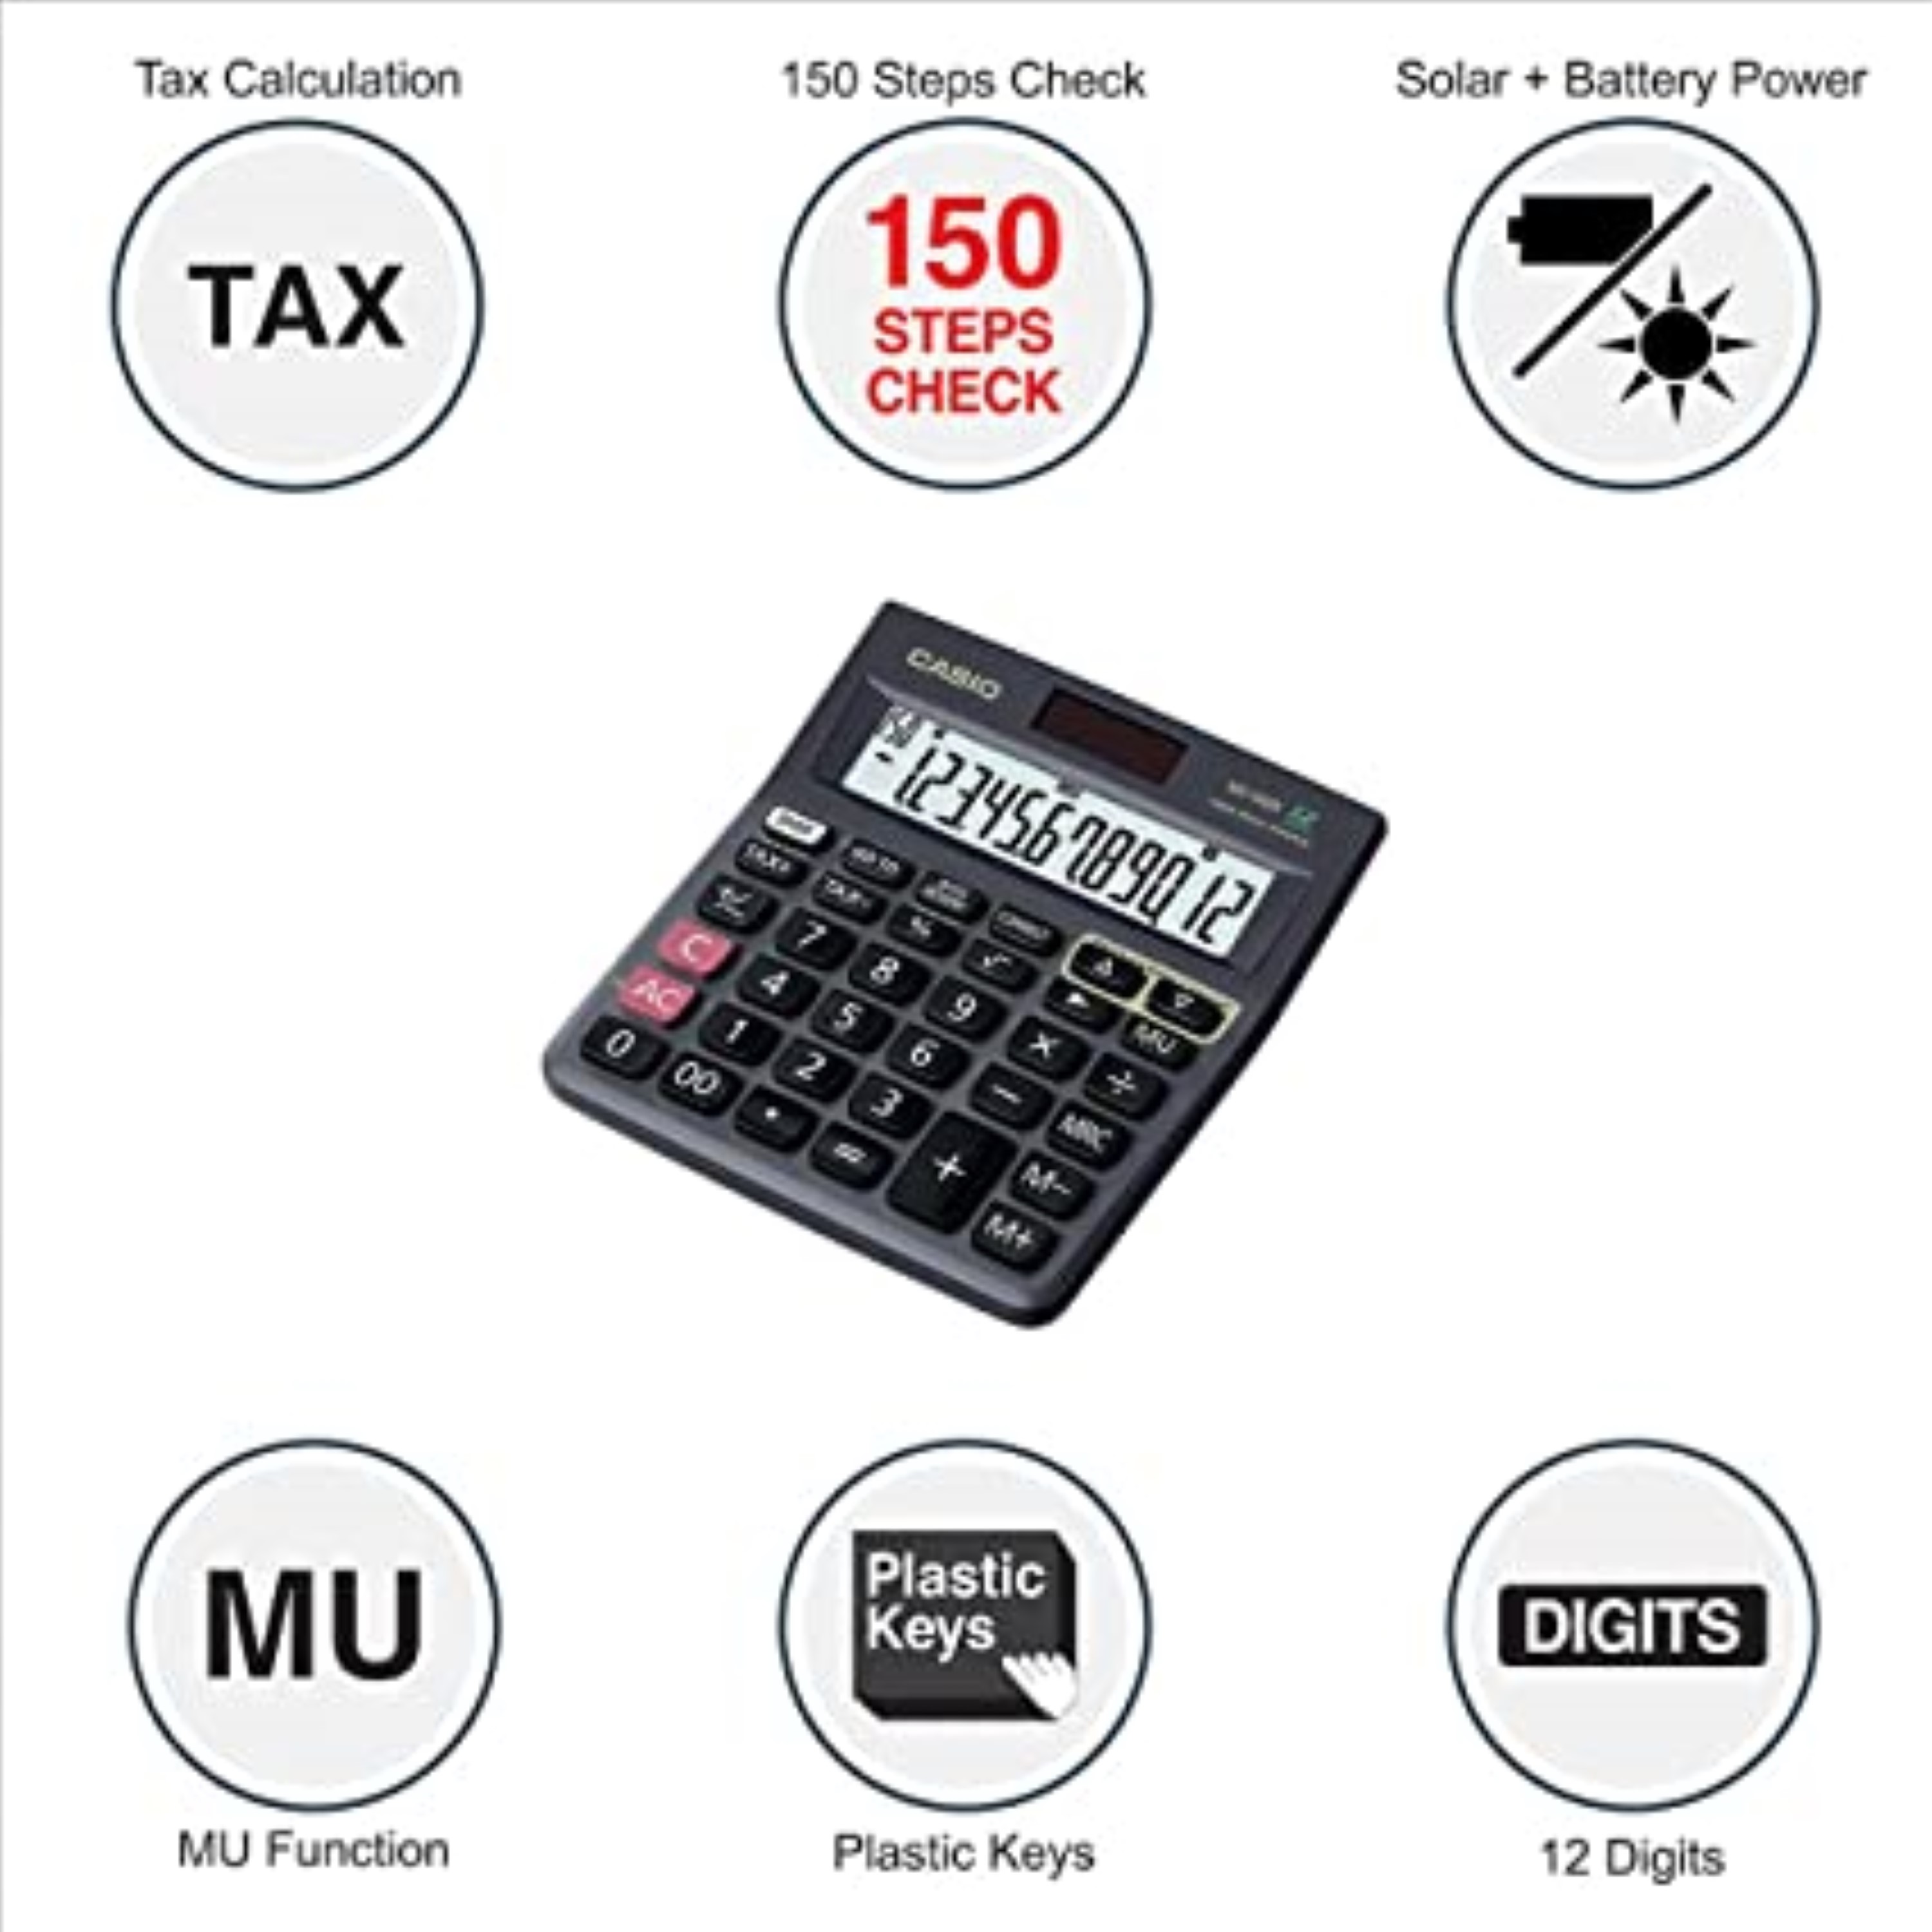 Casio MJ-120D Plus BK 300 Steps Check and Correct Desktop Calculator with Tax 